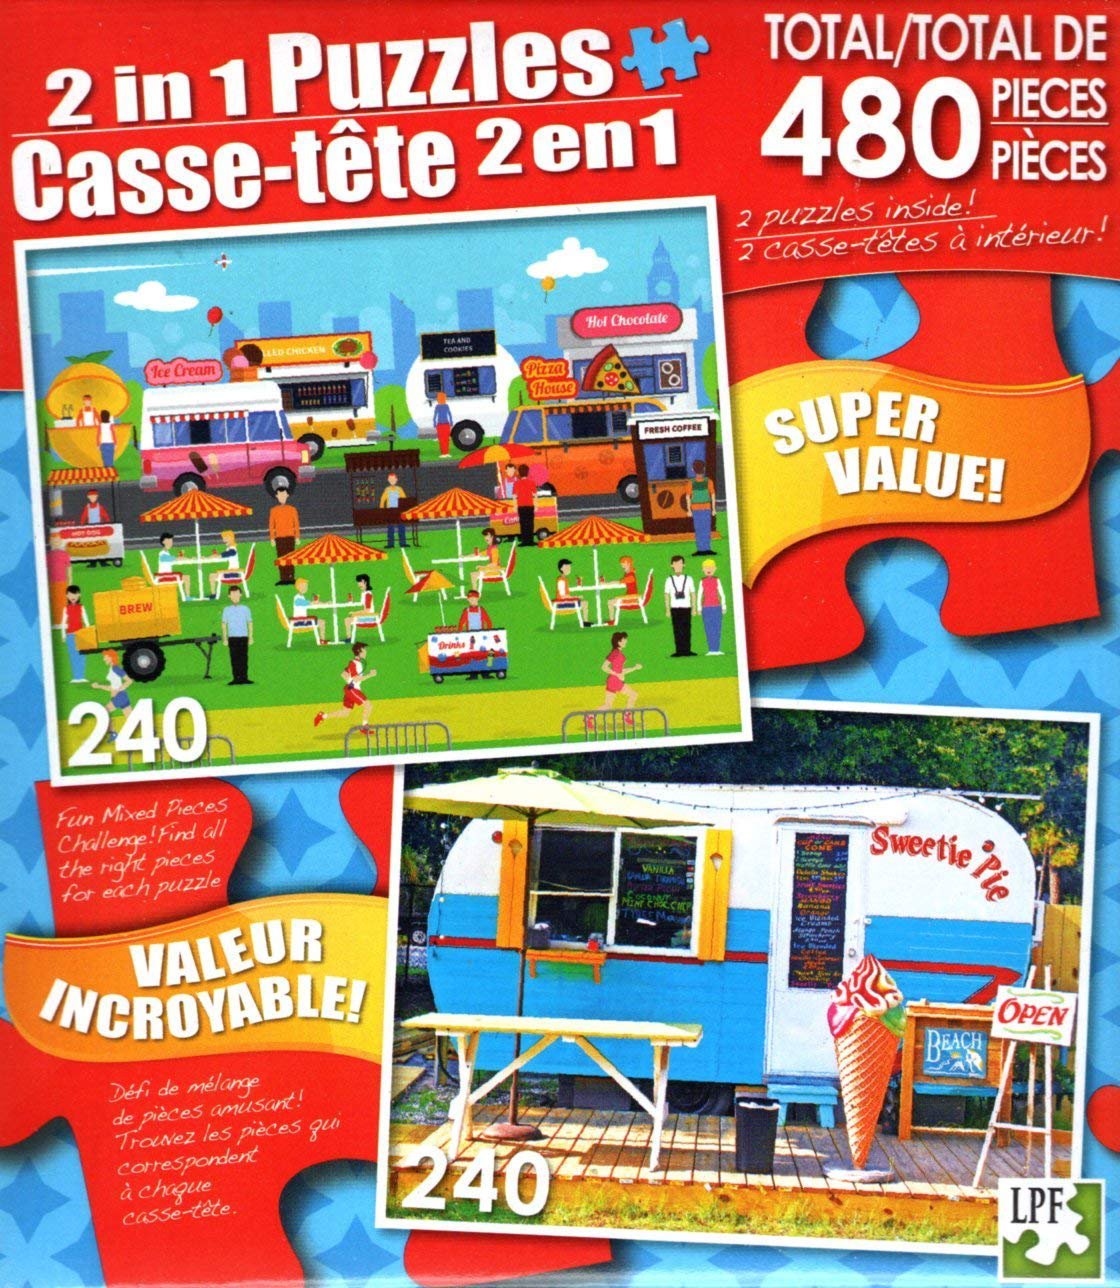 LPF Summer Day - Ice Cream Trailer - Total 480 Piece 2 in 1 Jigsaw Puzzles